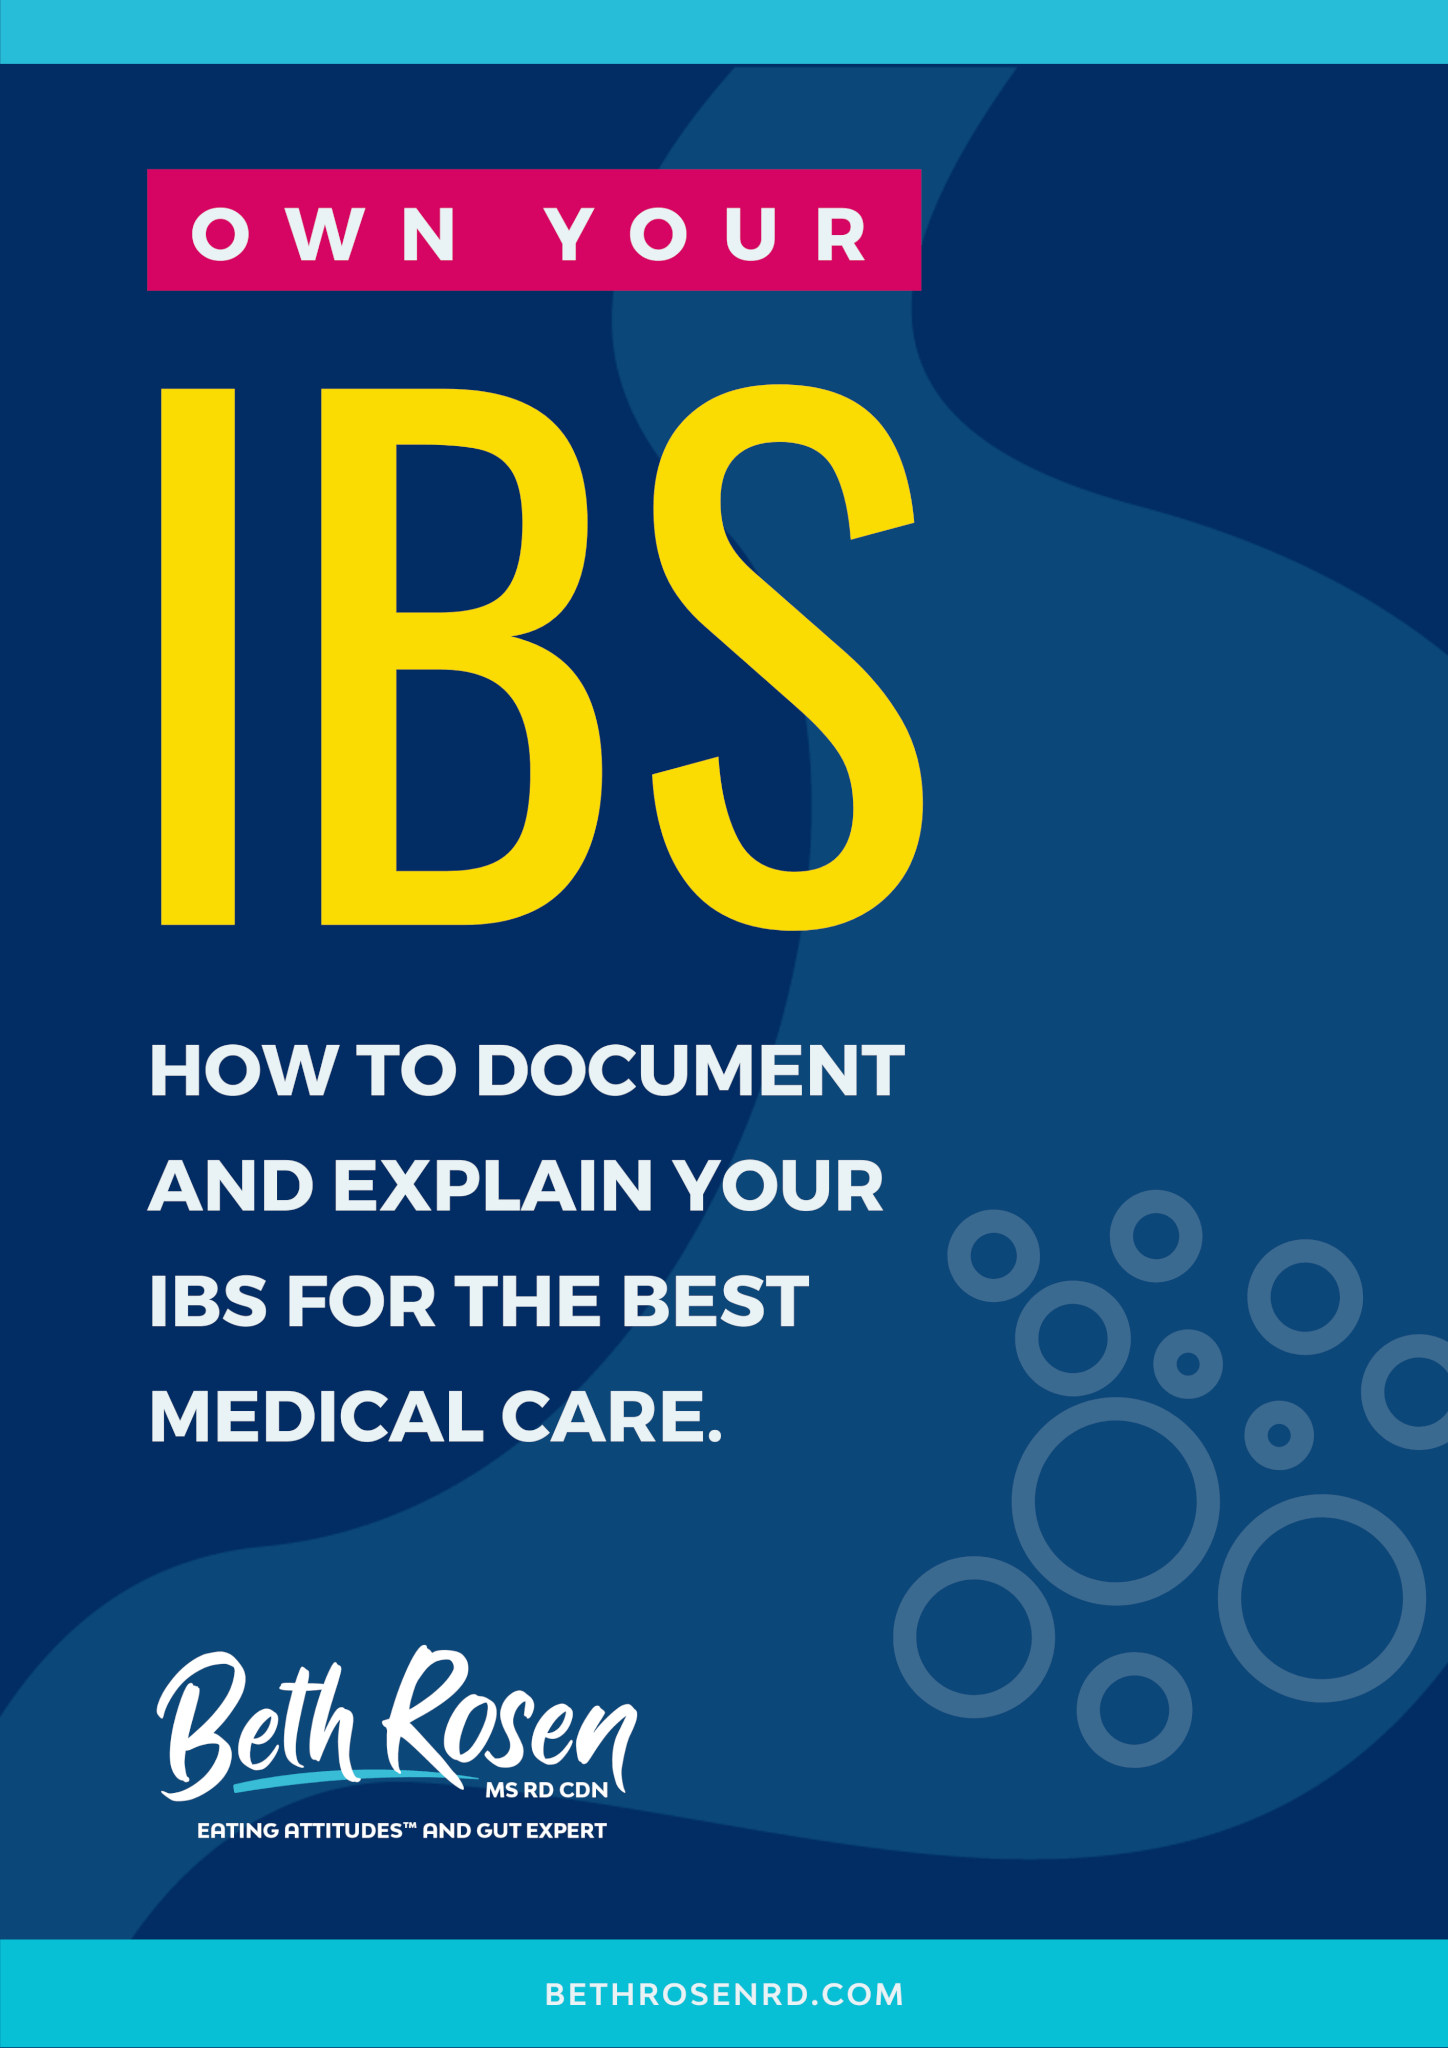 Own Your IBS, IBS Organizer from Beth Rosen RD